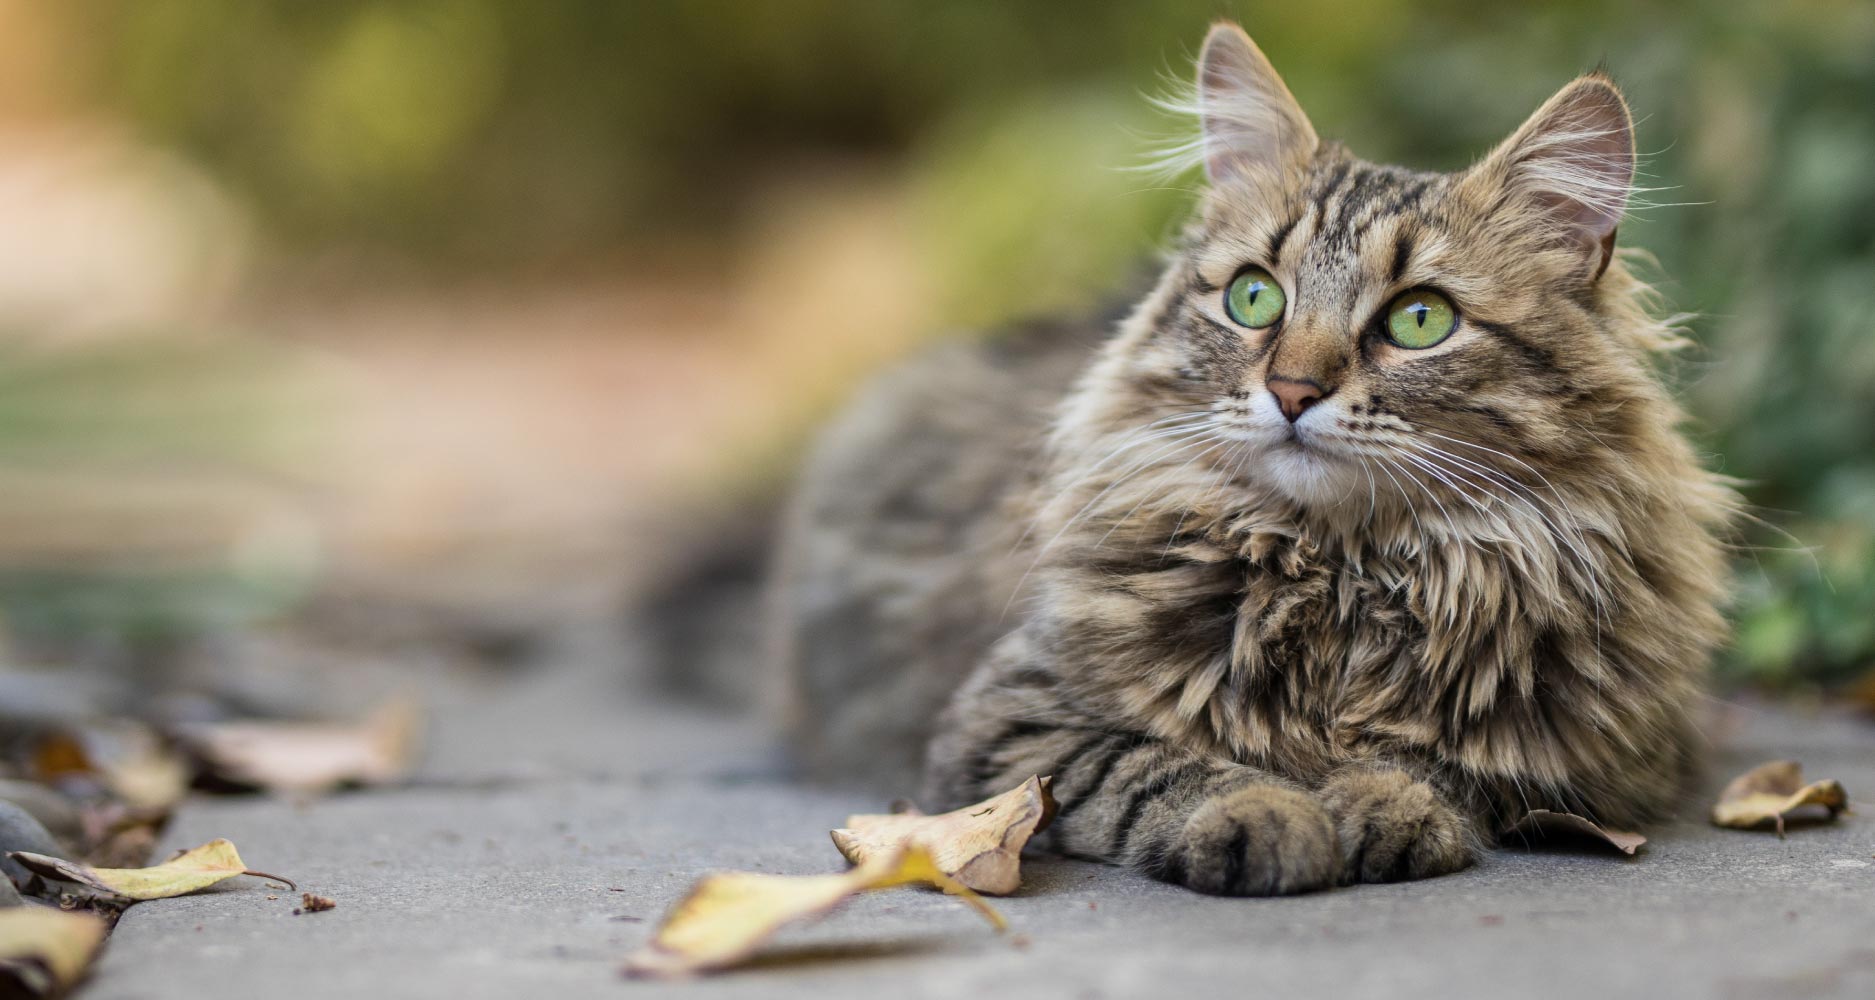 Does Your Cat Have A Healthy Coat &amp; Skin? - PetlifeAU™